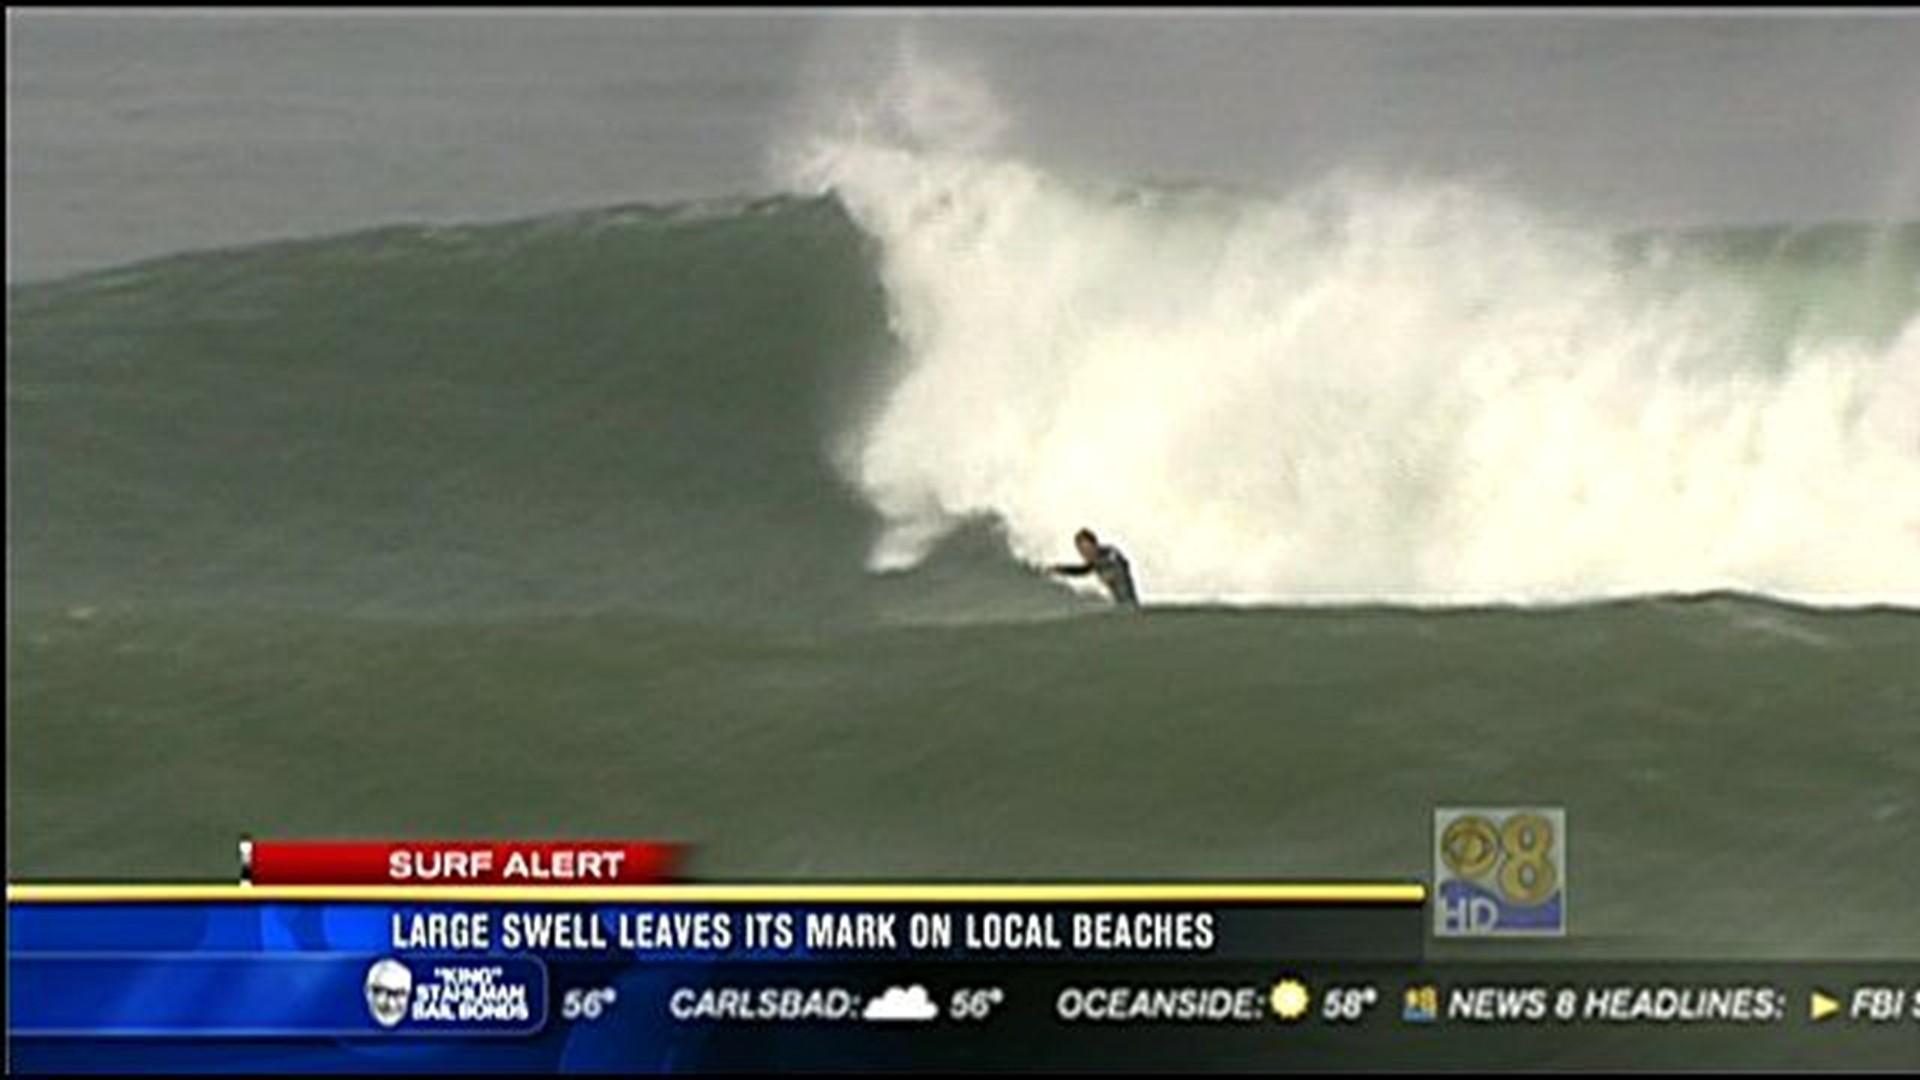 Big waves roll in again, expected to be head-high or bigger